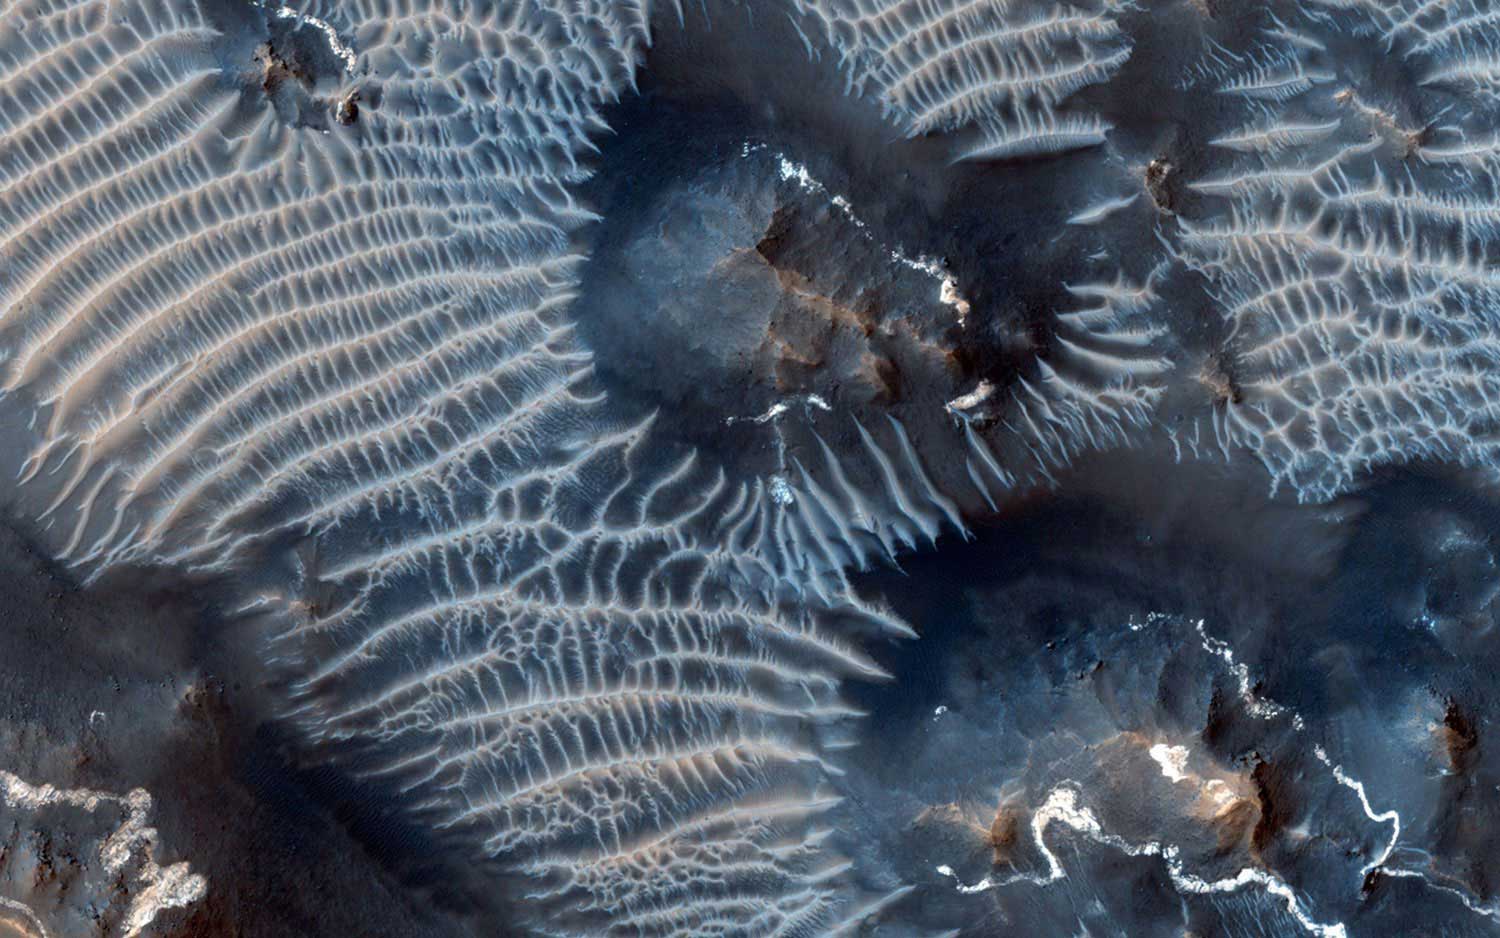 The Noctis Labyrinthus region of Mars, perched high in the Valles Marineris canyon system, as seen on Sept. 26, 2013. The image shows bright rimmed bedrock knobs, as well as two types of windblown sediments.